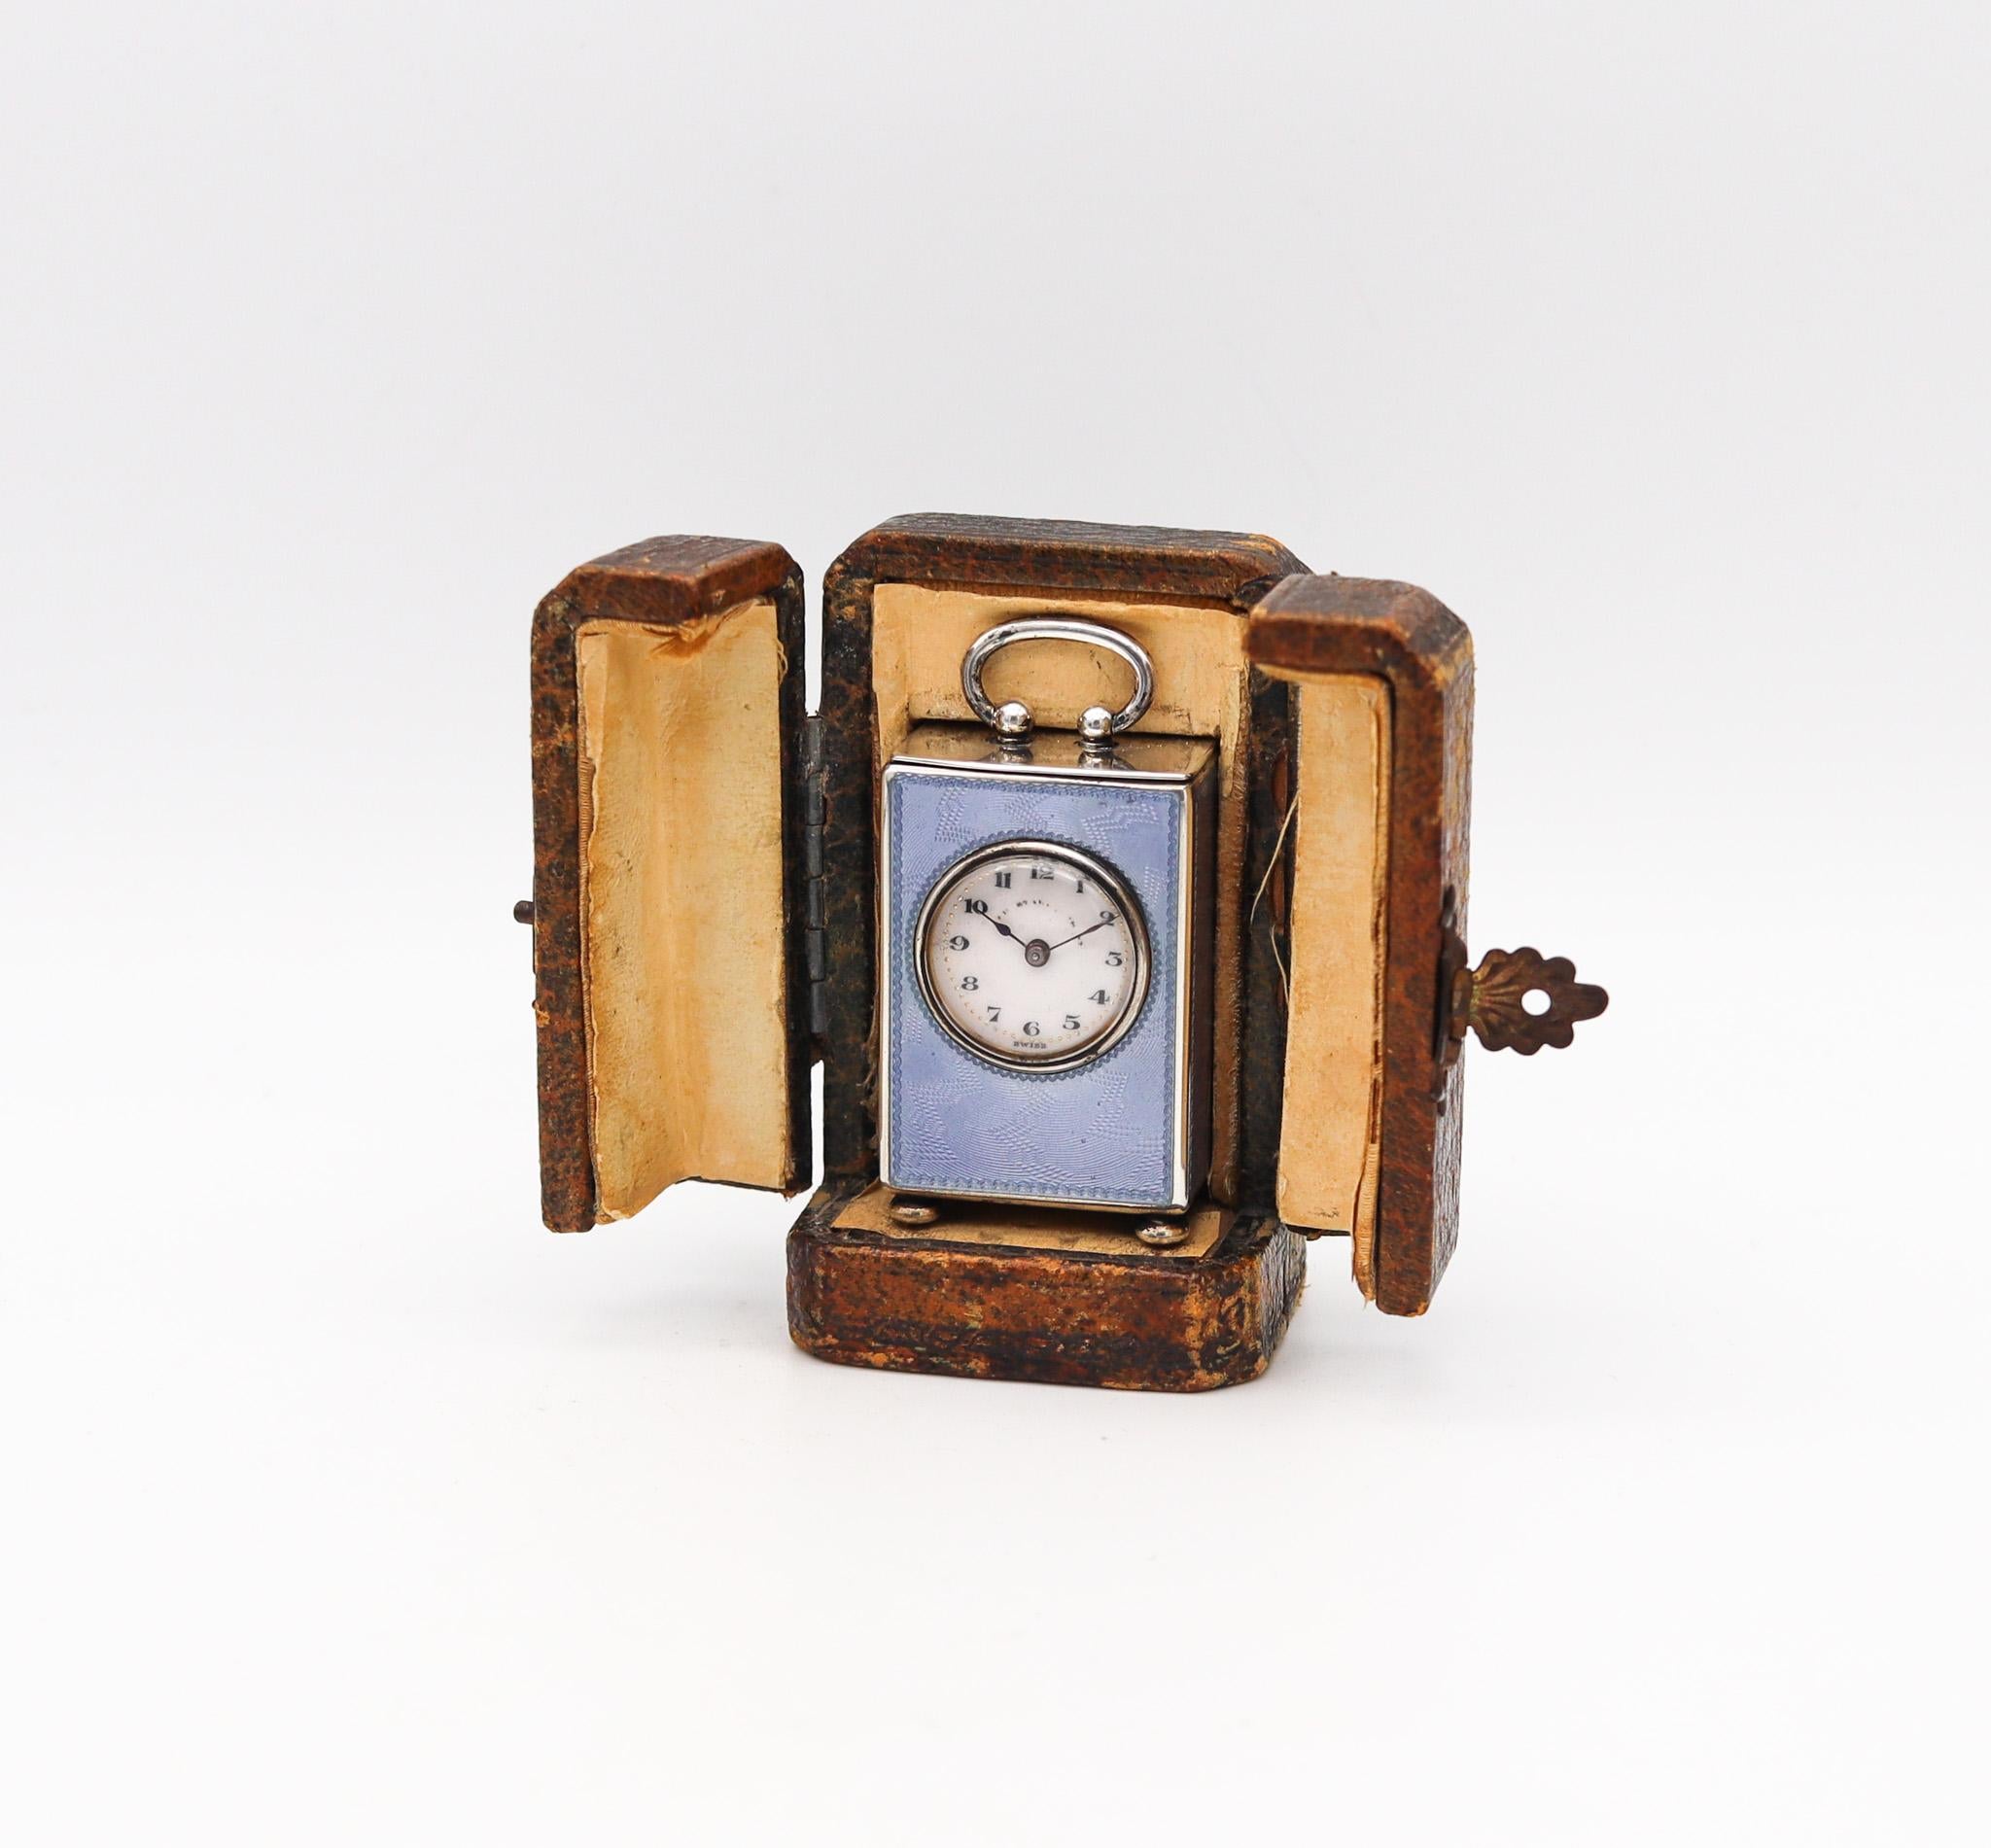 An Edwardian miniature travel clock.

An outstanding antique miniature travel-carriage boudoir clock, made in Geneva Switzerland by the Concord Watch Co. This little antique clock is exceptionally beautiful. It was created during the Edwardian and